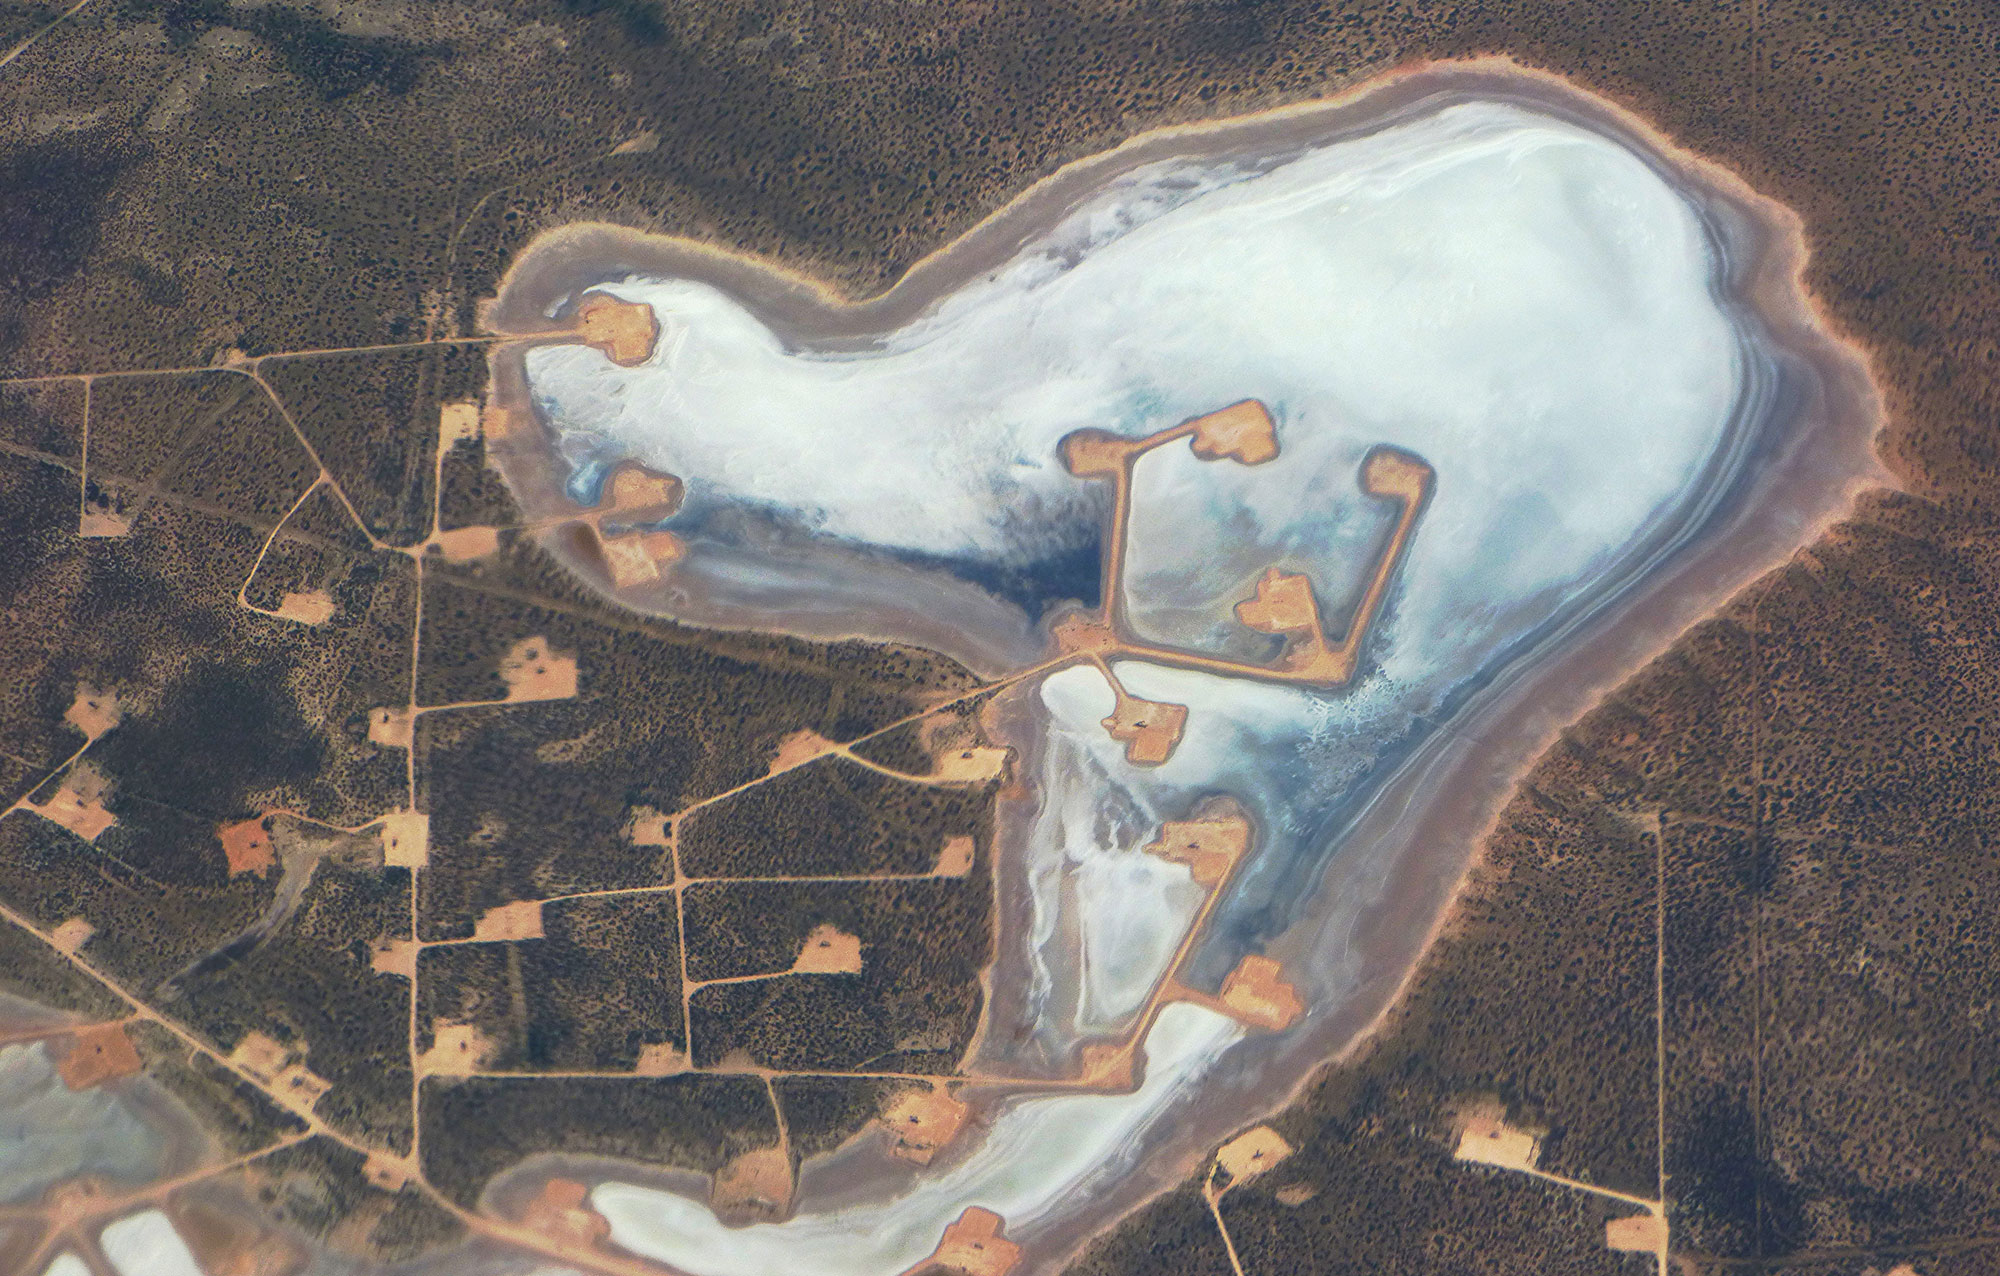 Aerial photograph of Juan Cordona Lake and surrounding land in west Texas showing development for oil and gas extraction. The photo shows a network of roads and oil well pads on the landscape and extending into the lake.